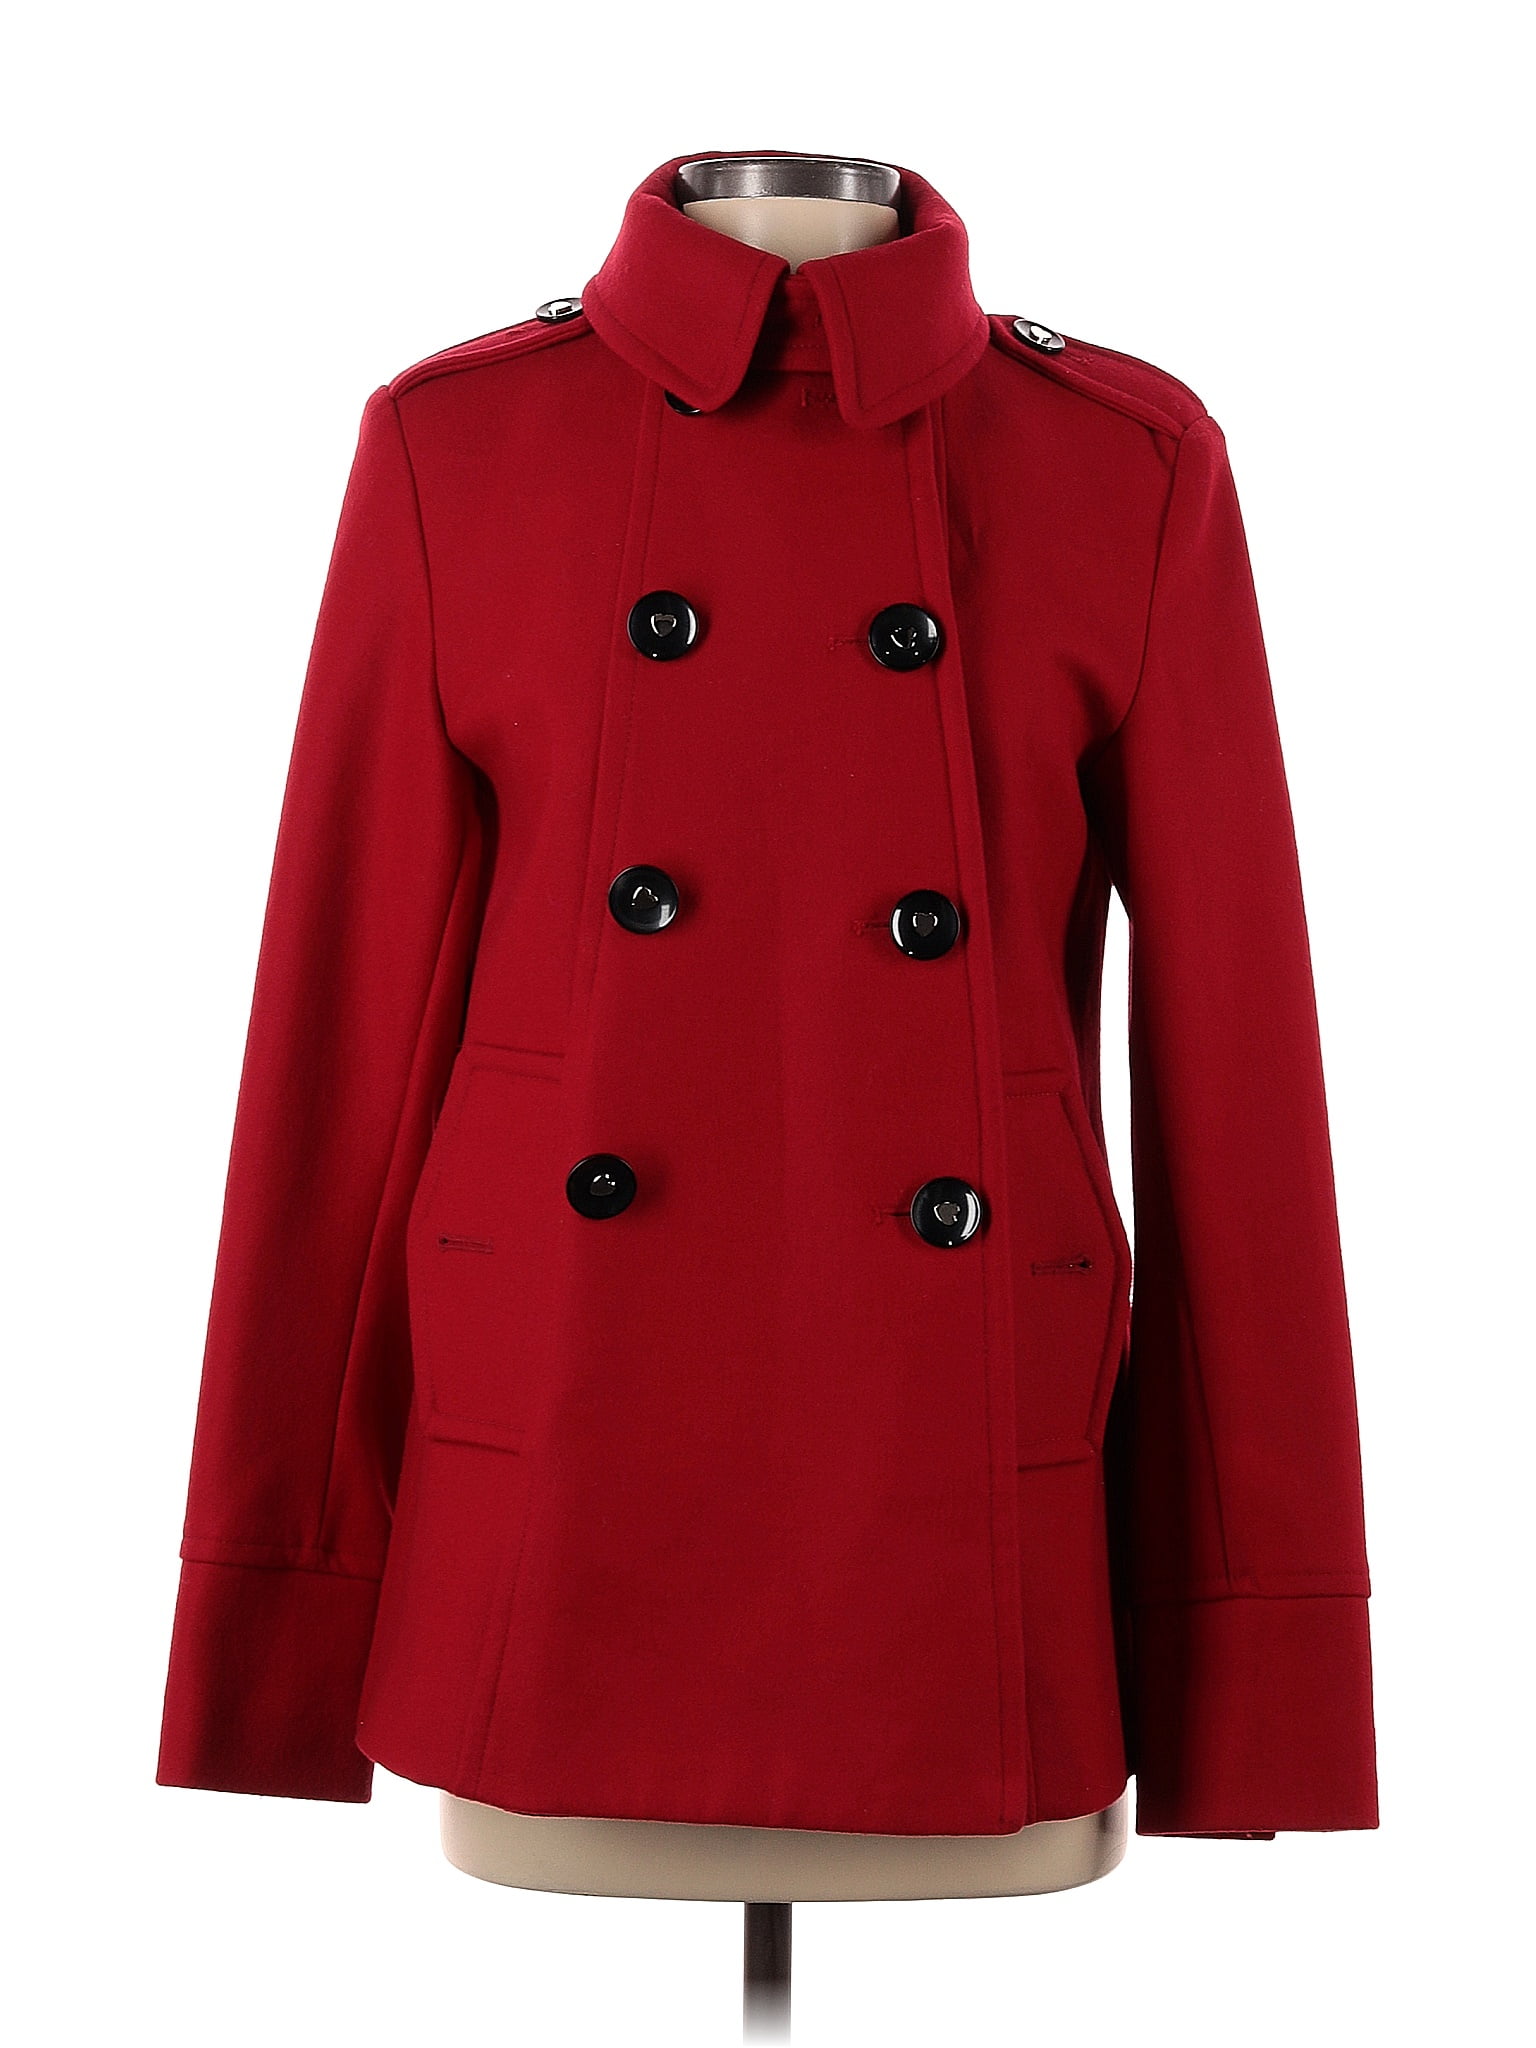 Betsey Johnson 100% Polyester Solid Red Coat Size 4 - 73% off | thredUP